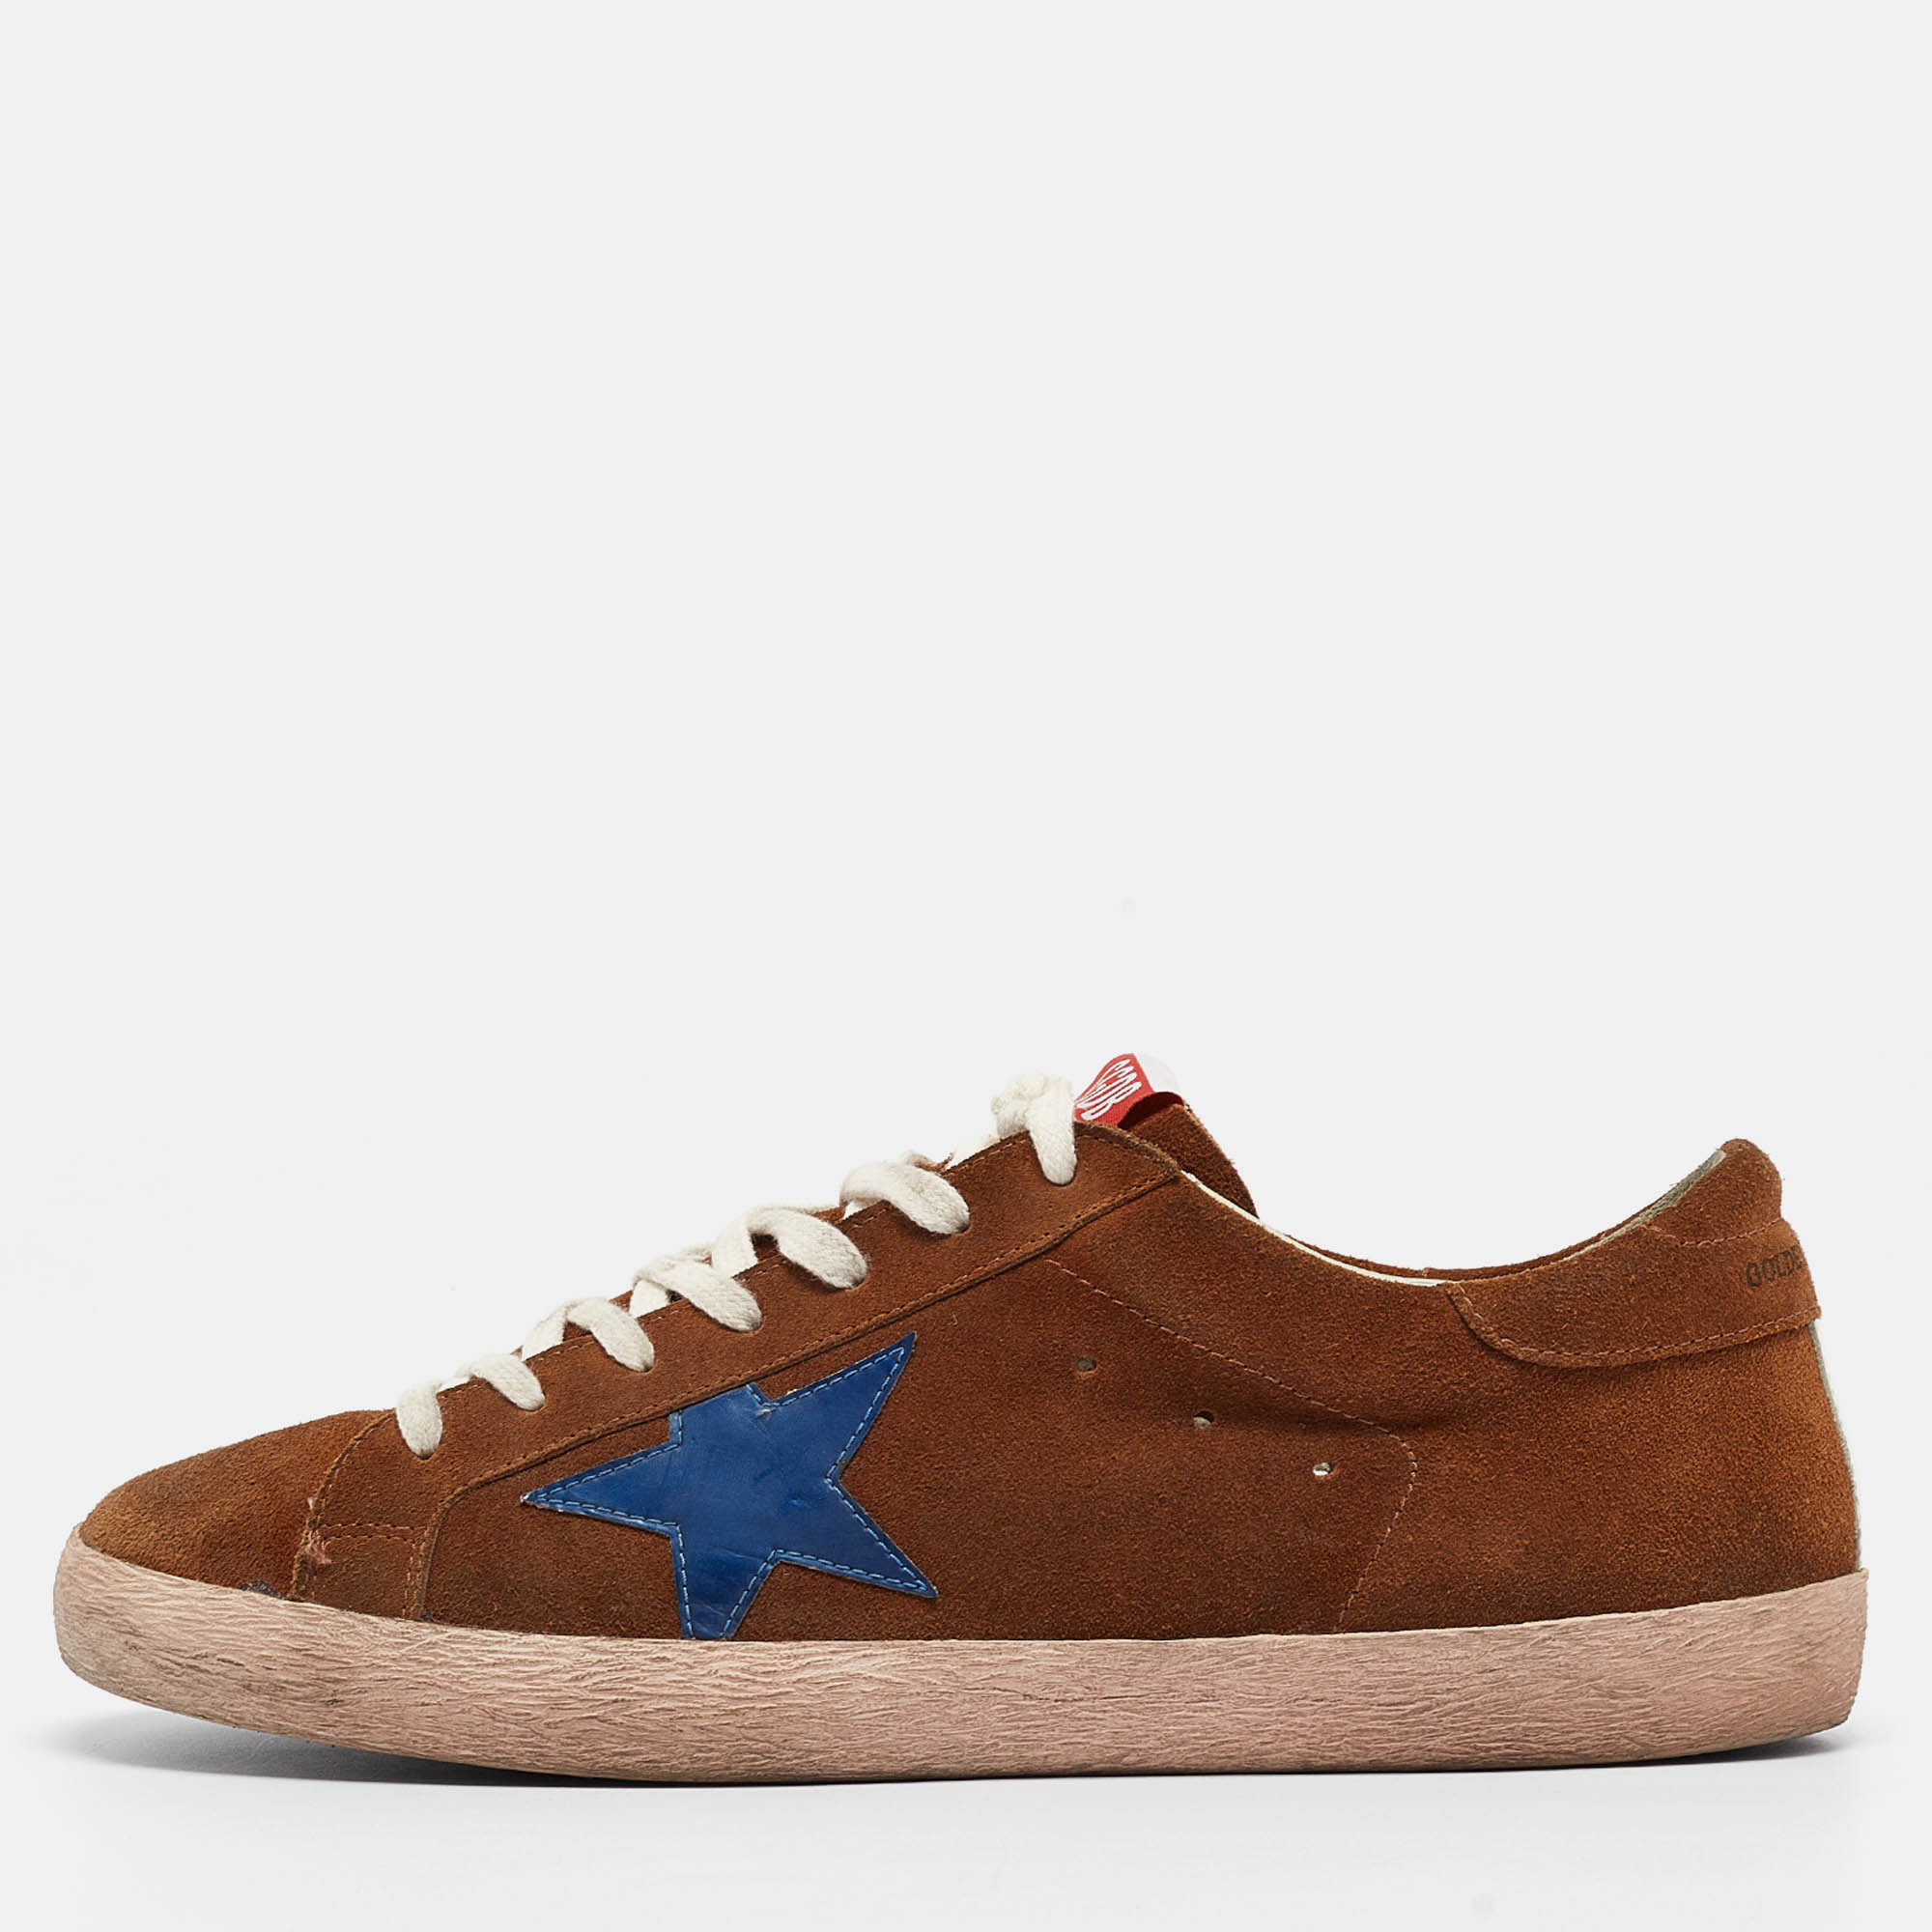 

Golden Goose Brown/Blue Suede and Leather Superstar Sneakers Size